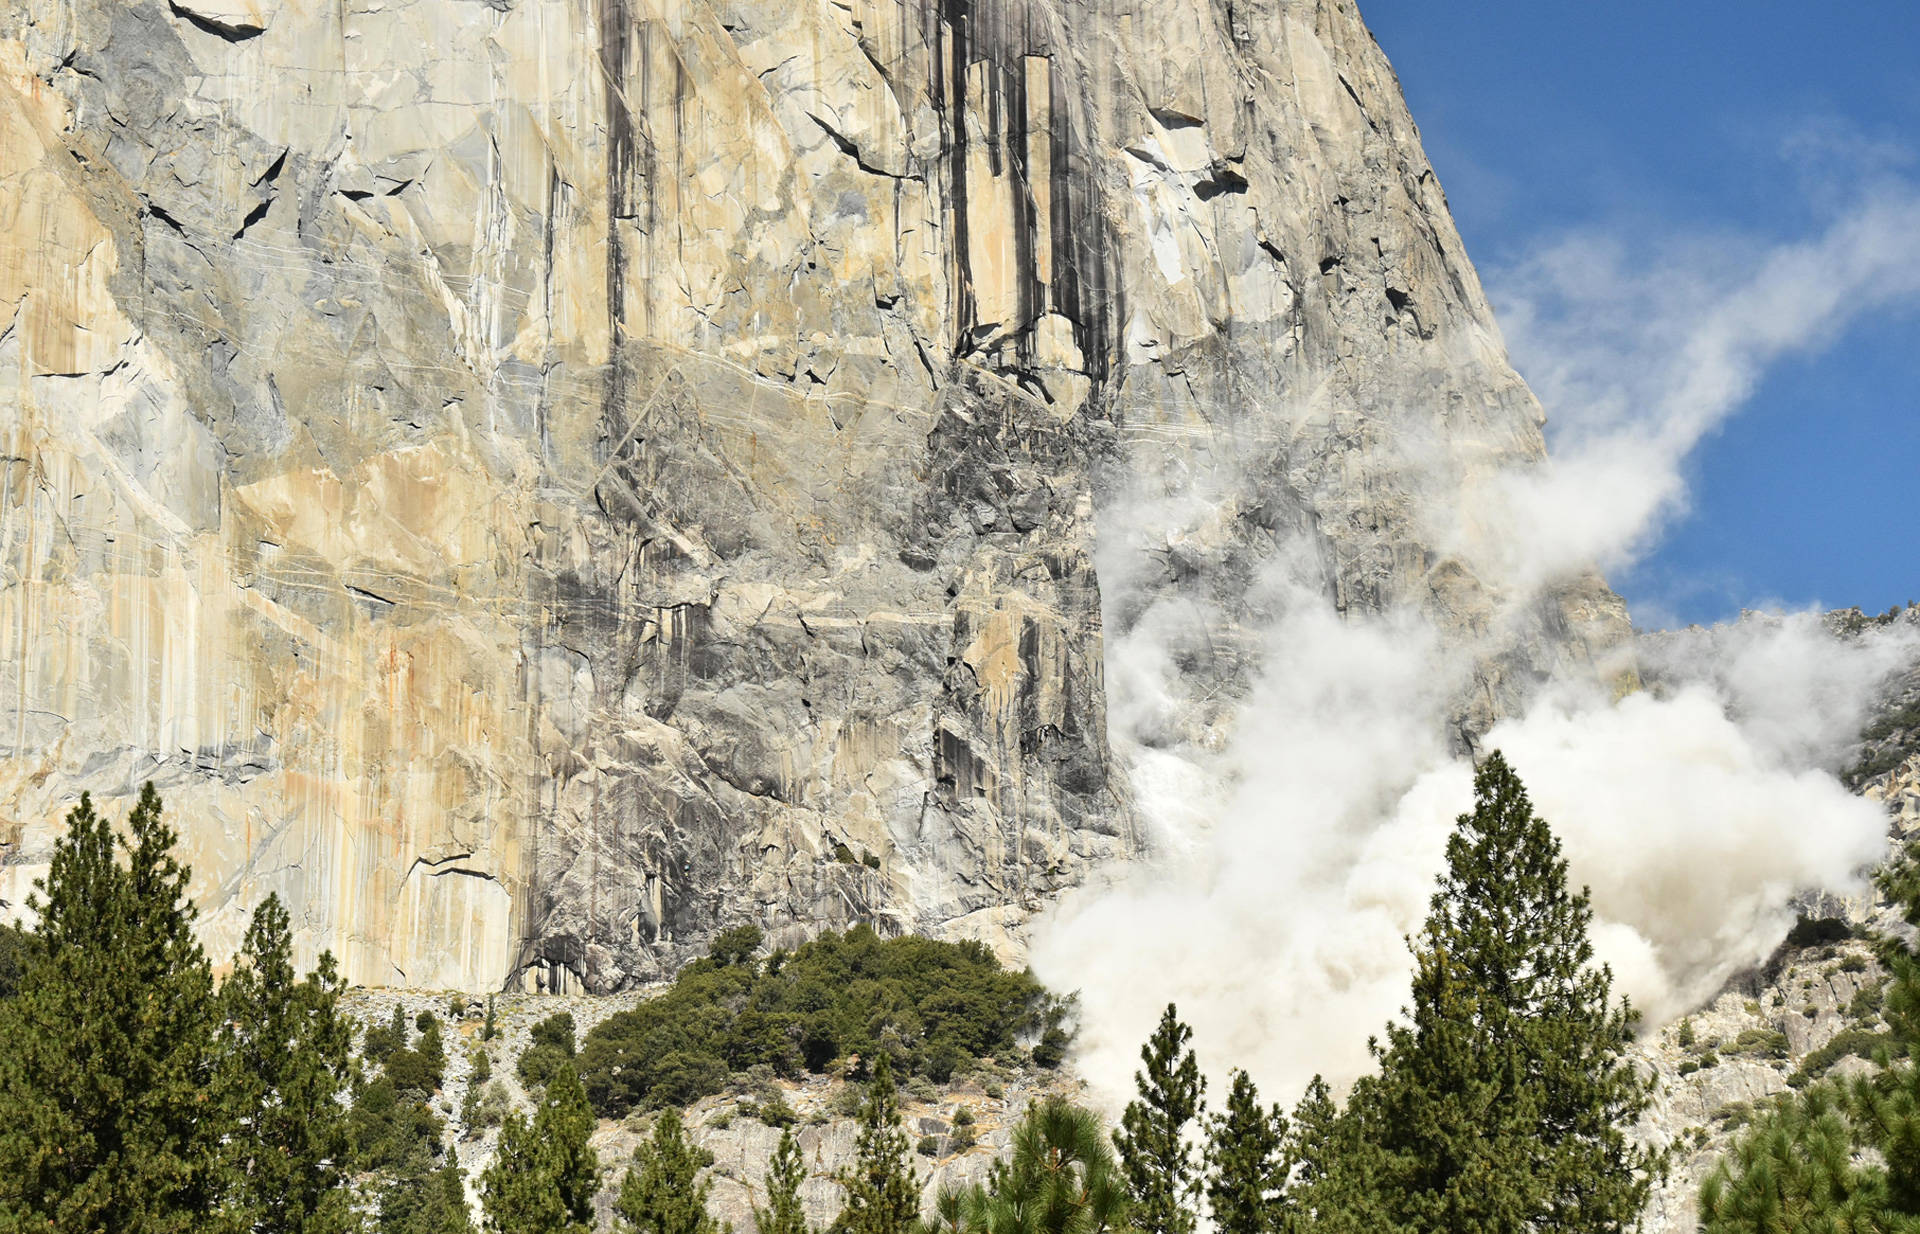 Dust rises from the base of El Capitan following Wednesday's deadly rockfall. Courtesy Tom Evans